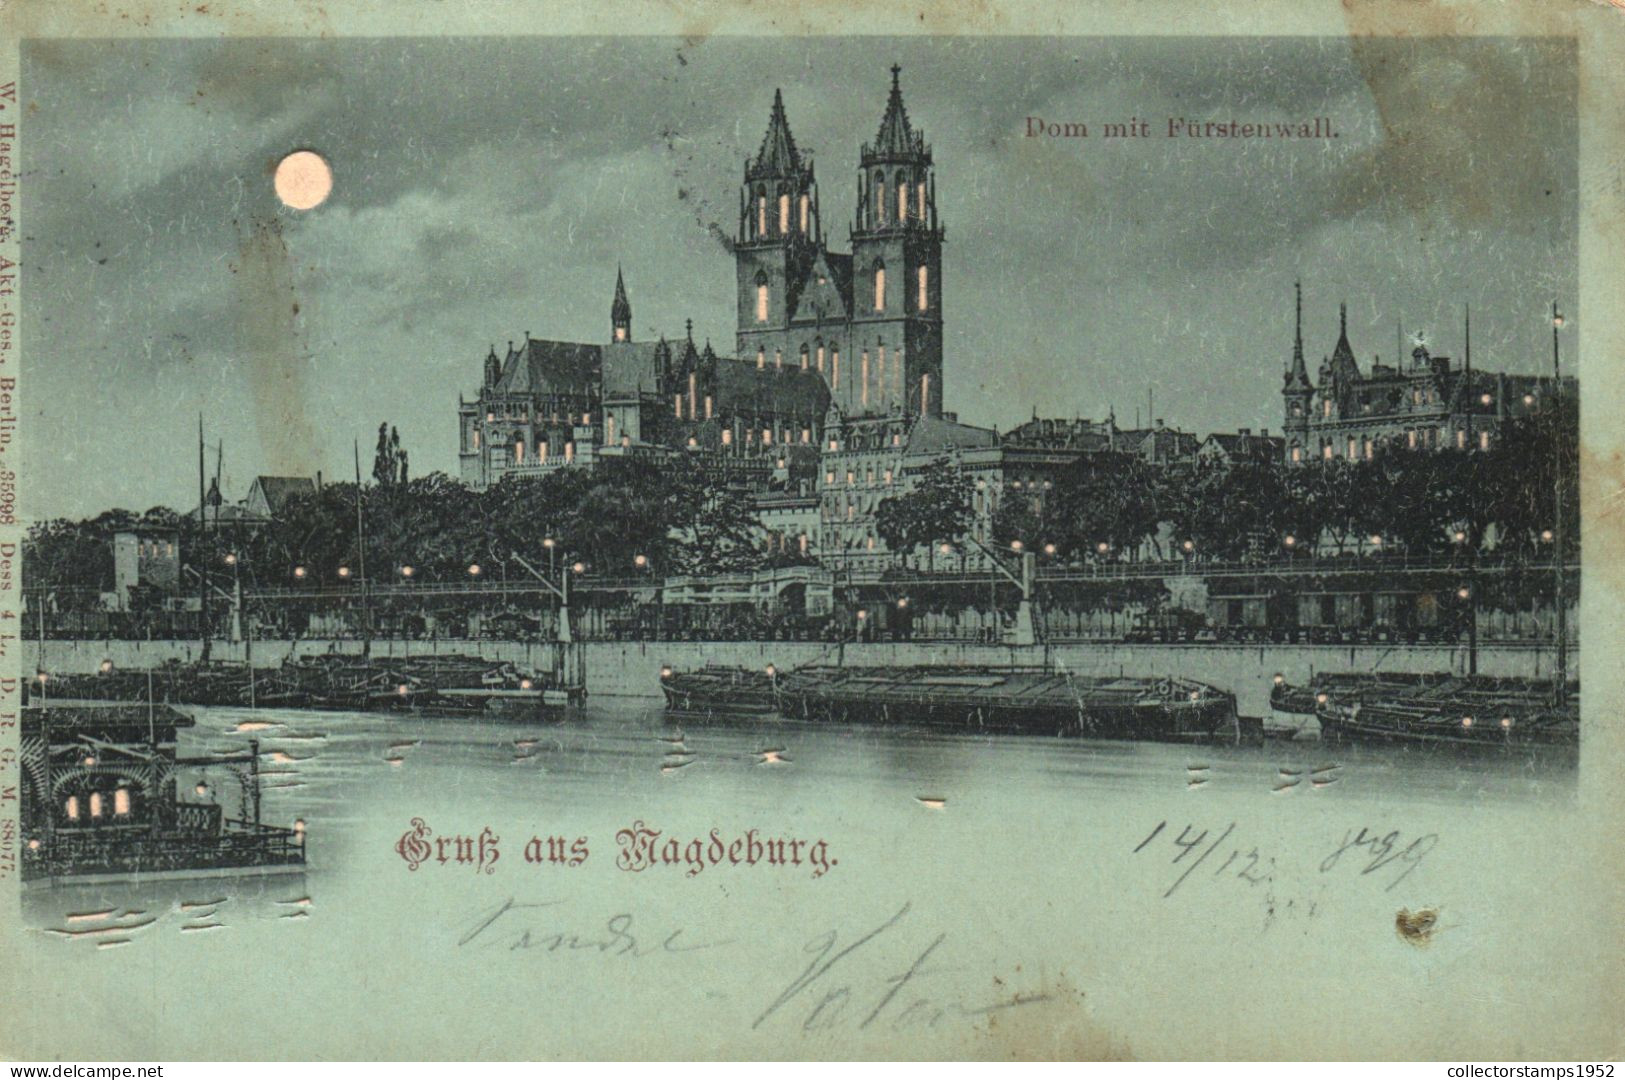 MAGDEBURG, ARCHITECTURE, PORT, BOATS, CHURCH, GERMANY, POSTCARD - Magdeburg